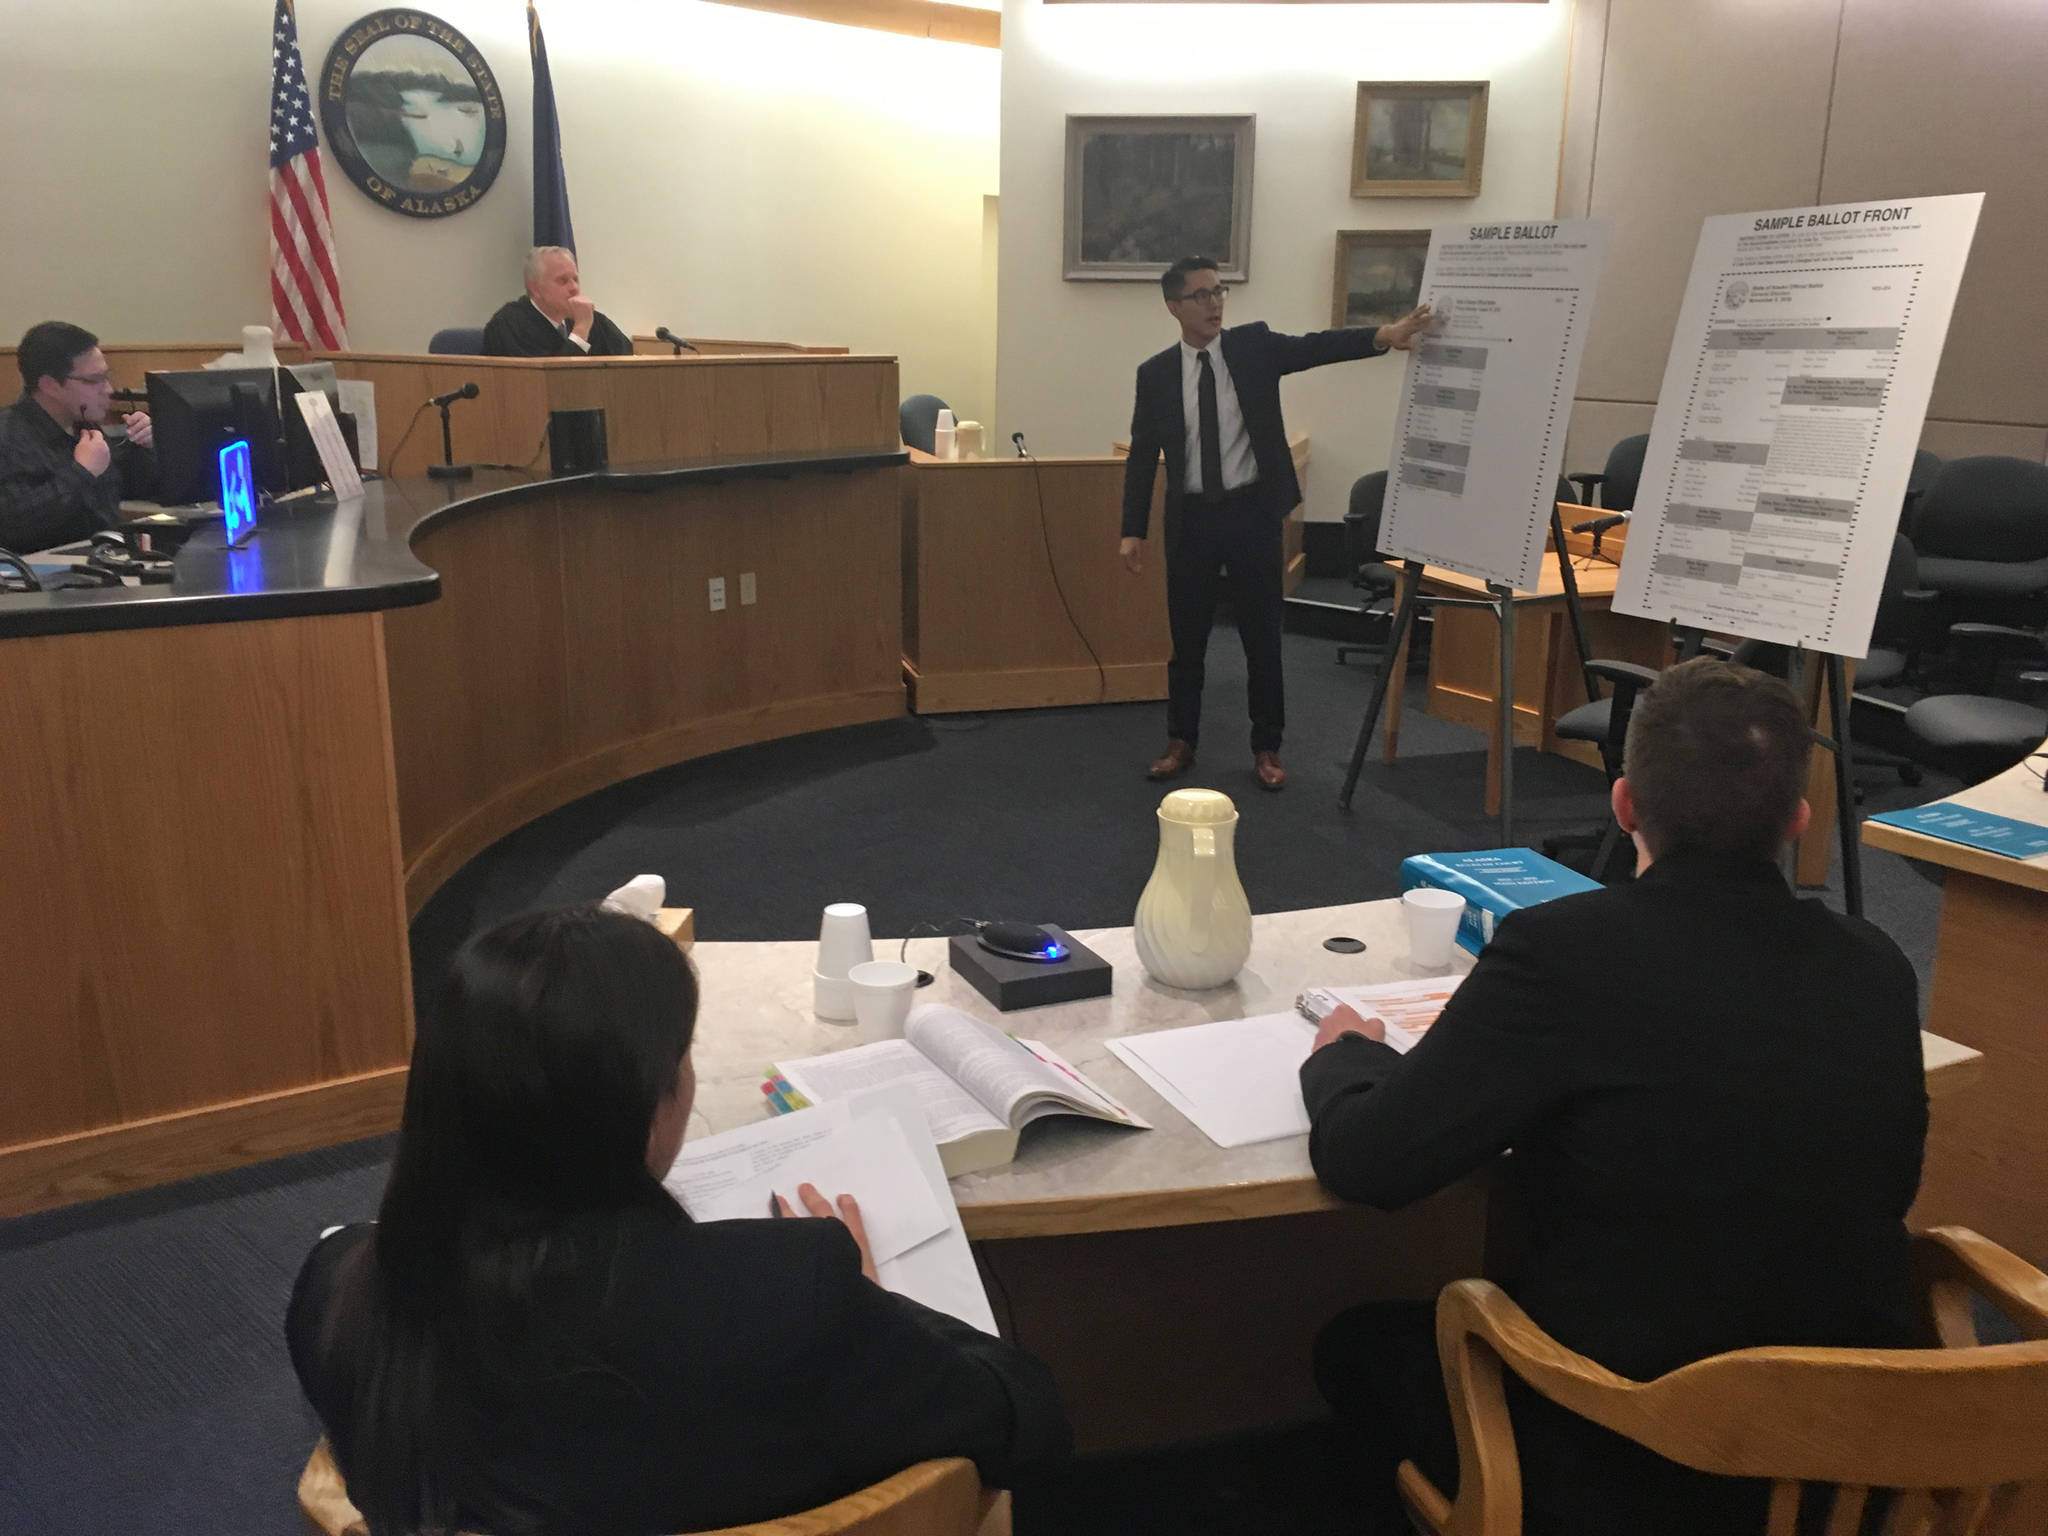 State attorneys Elizabeth Bakalar, foreground left, and Margaret Paton-Walsh, foreground right, listen to arguments made by attorney Jon Choate on Thursday, Sept. 21, 2017 in Alaska Superior Court in Juneau. At background left is Judge Philip Pallenberg, who is expected to decide the Alaska Democratic Party’s lawsuit against the state next week. (James Brooks | Juneau Empire)